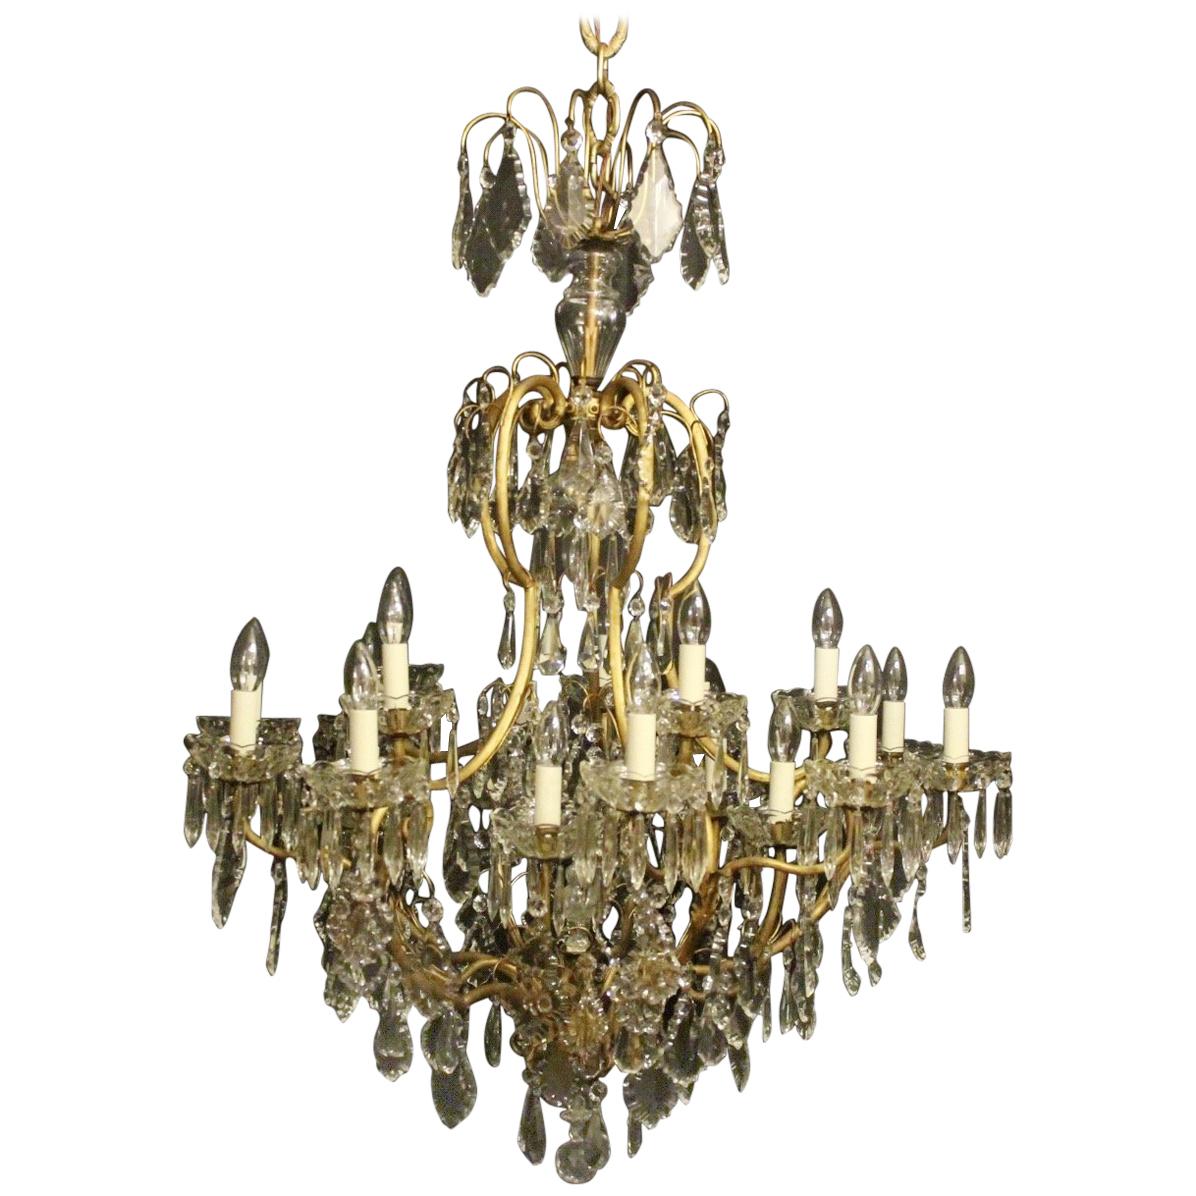 French Large Gilded and Crystal 21 Light Birdcage Antique Chandelier For Sale